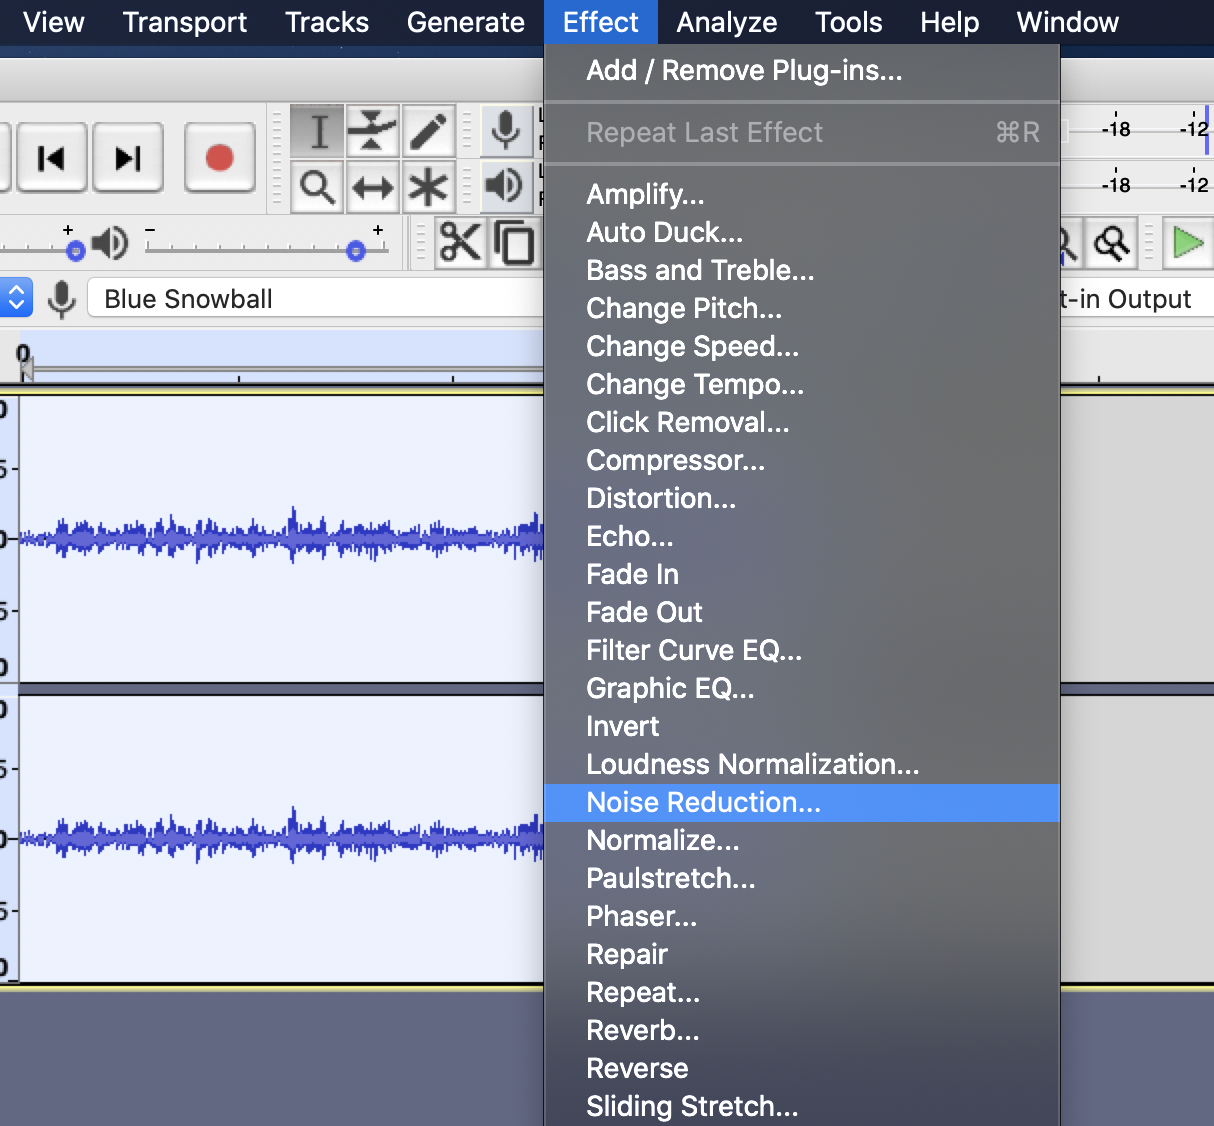 Audacity window with Noise Reduction selected from top of screen tool bar under Effects